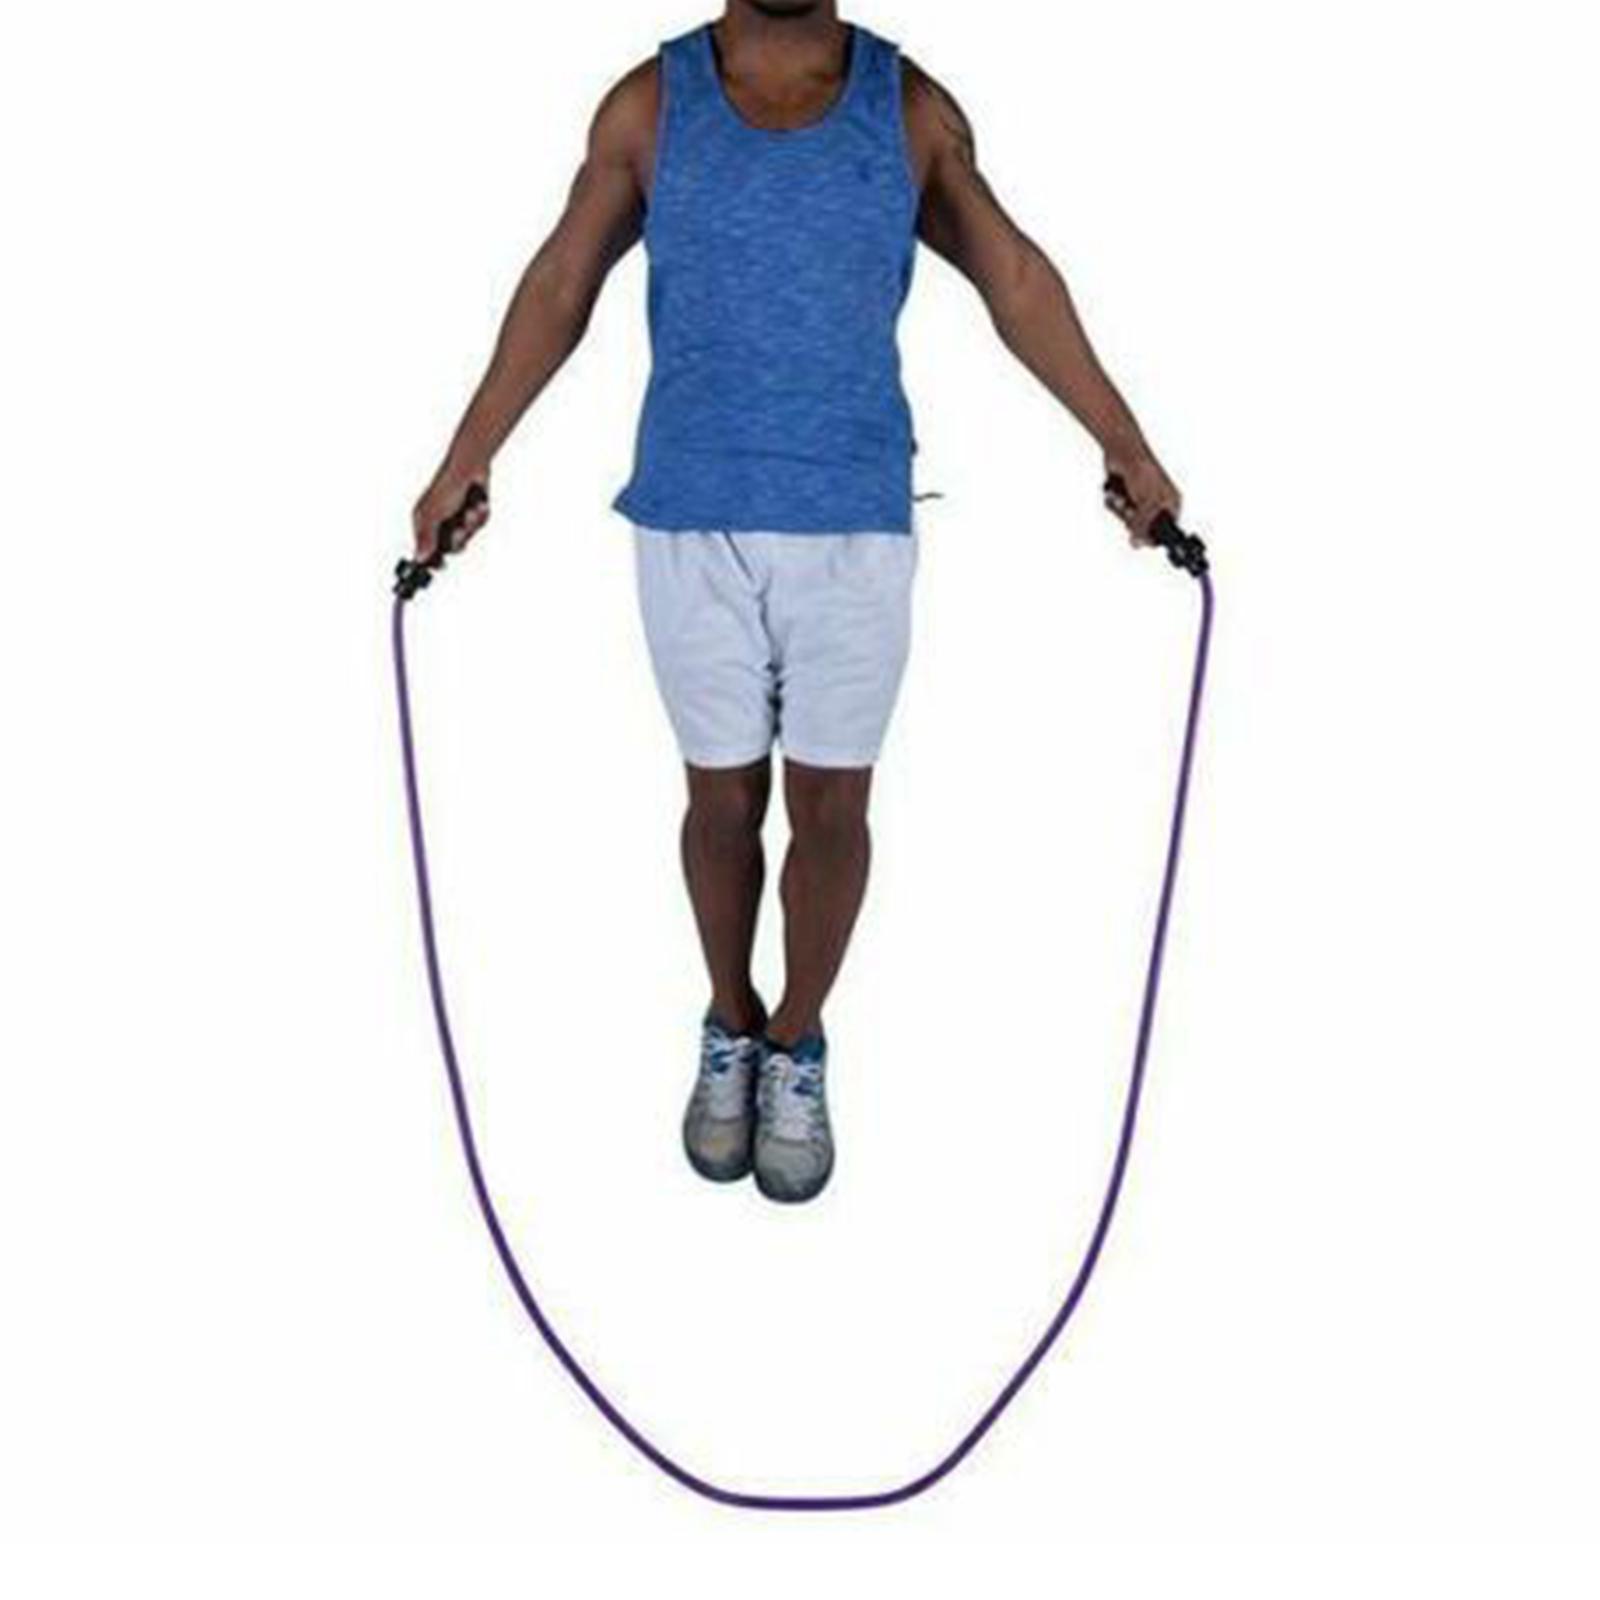 Jumping Ropes Speed Skipping Rope Boxing Exercise Fitness Adult